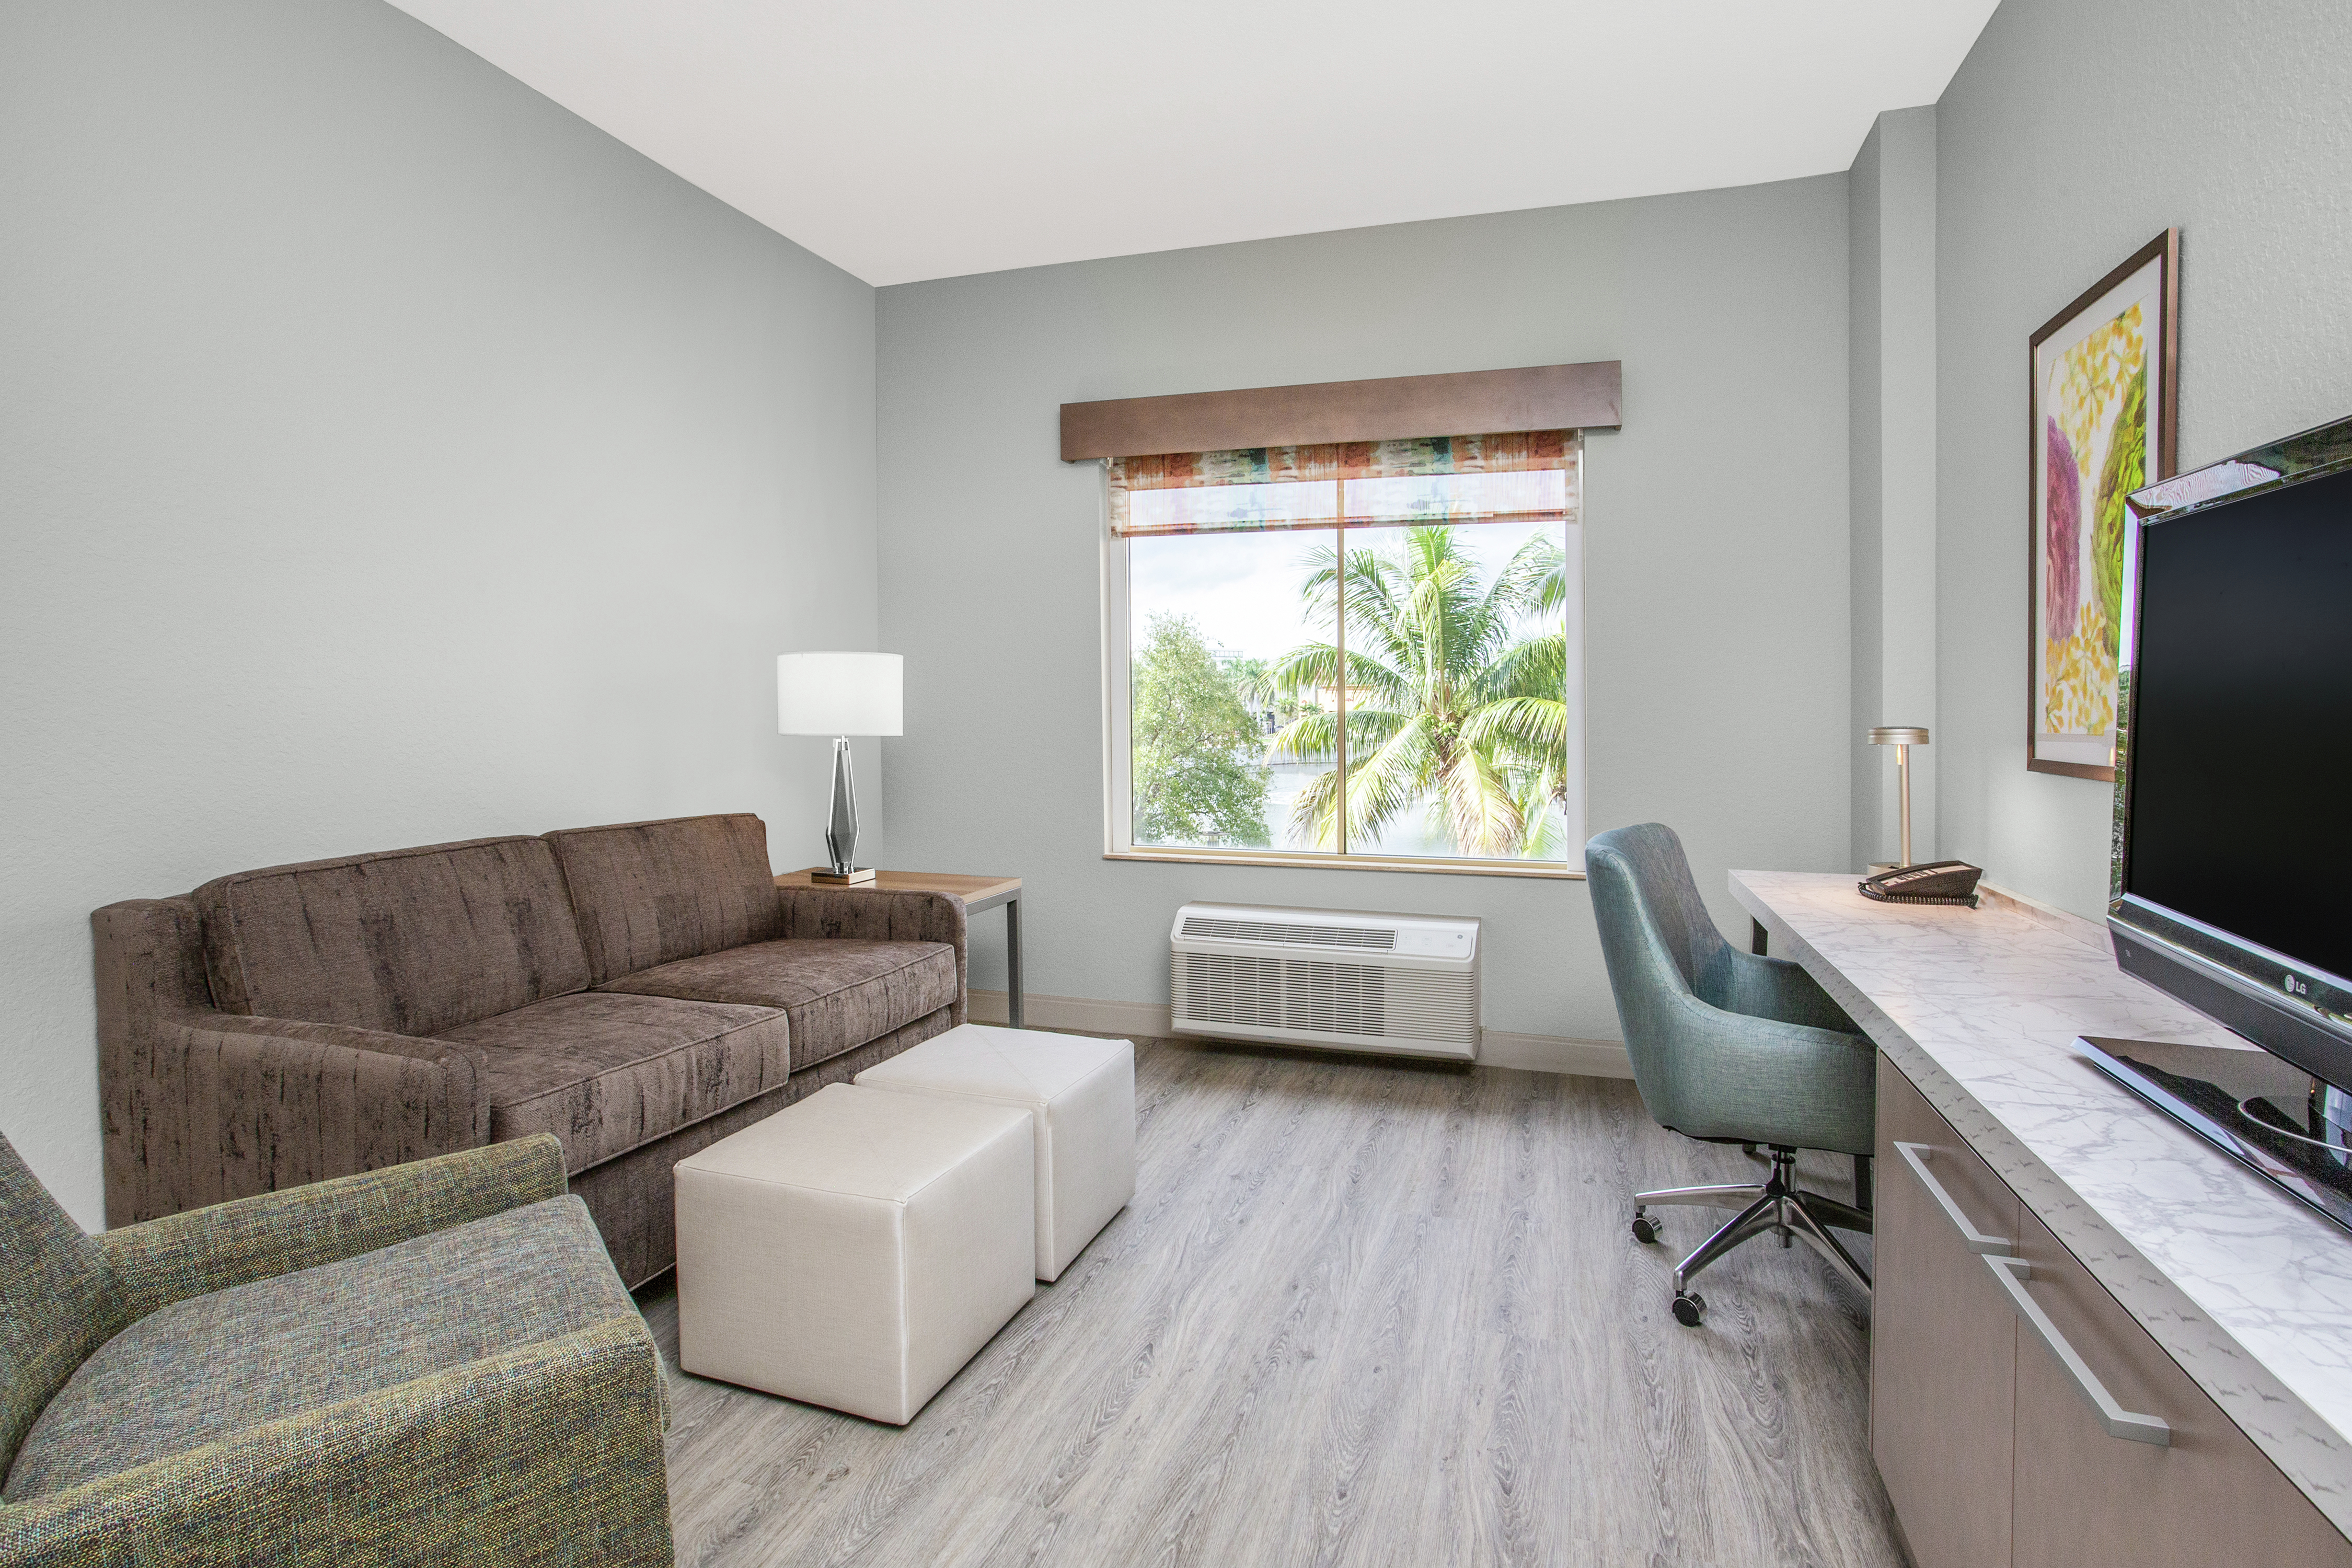 Accessible King Suite Guestroom with Lounge Area, Outside View, Work Desk, and Room Technology